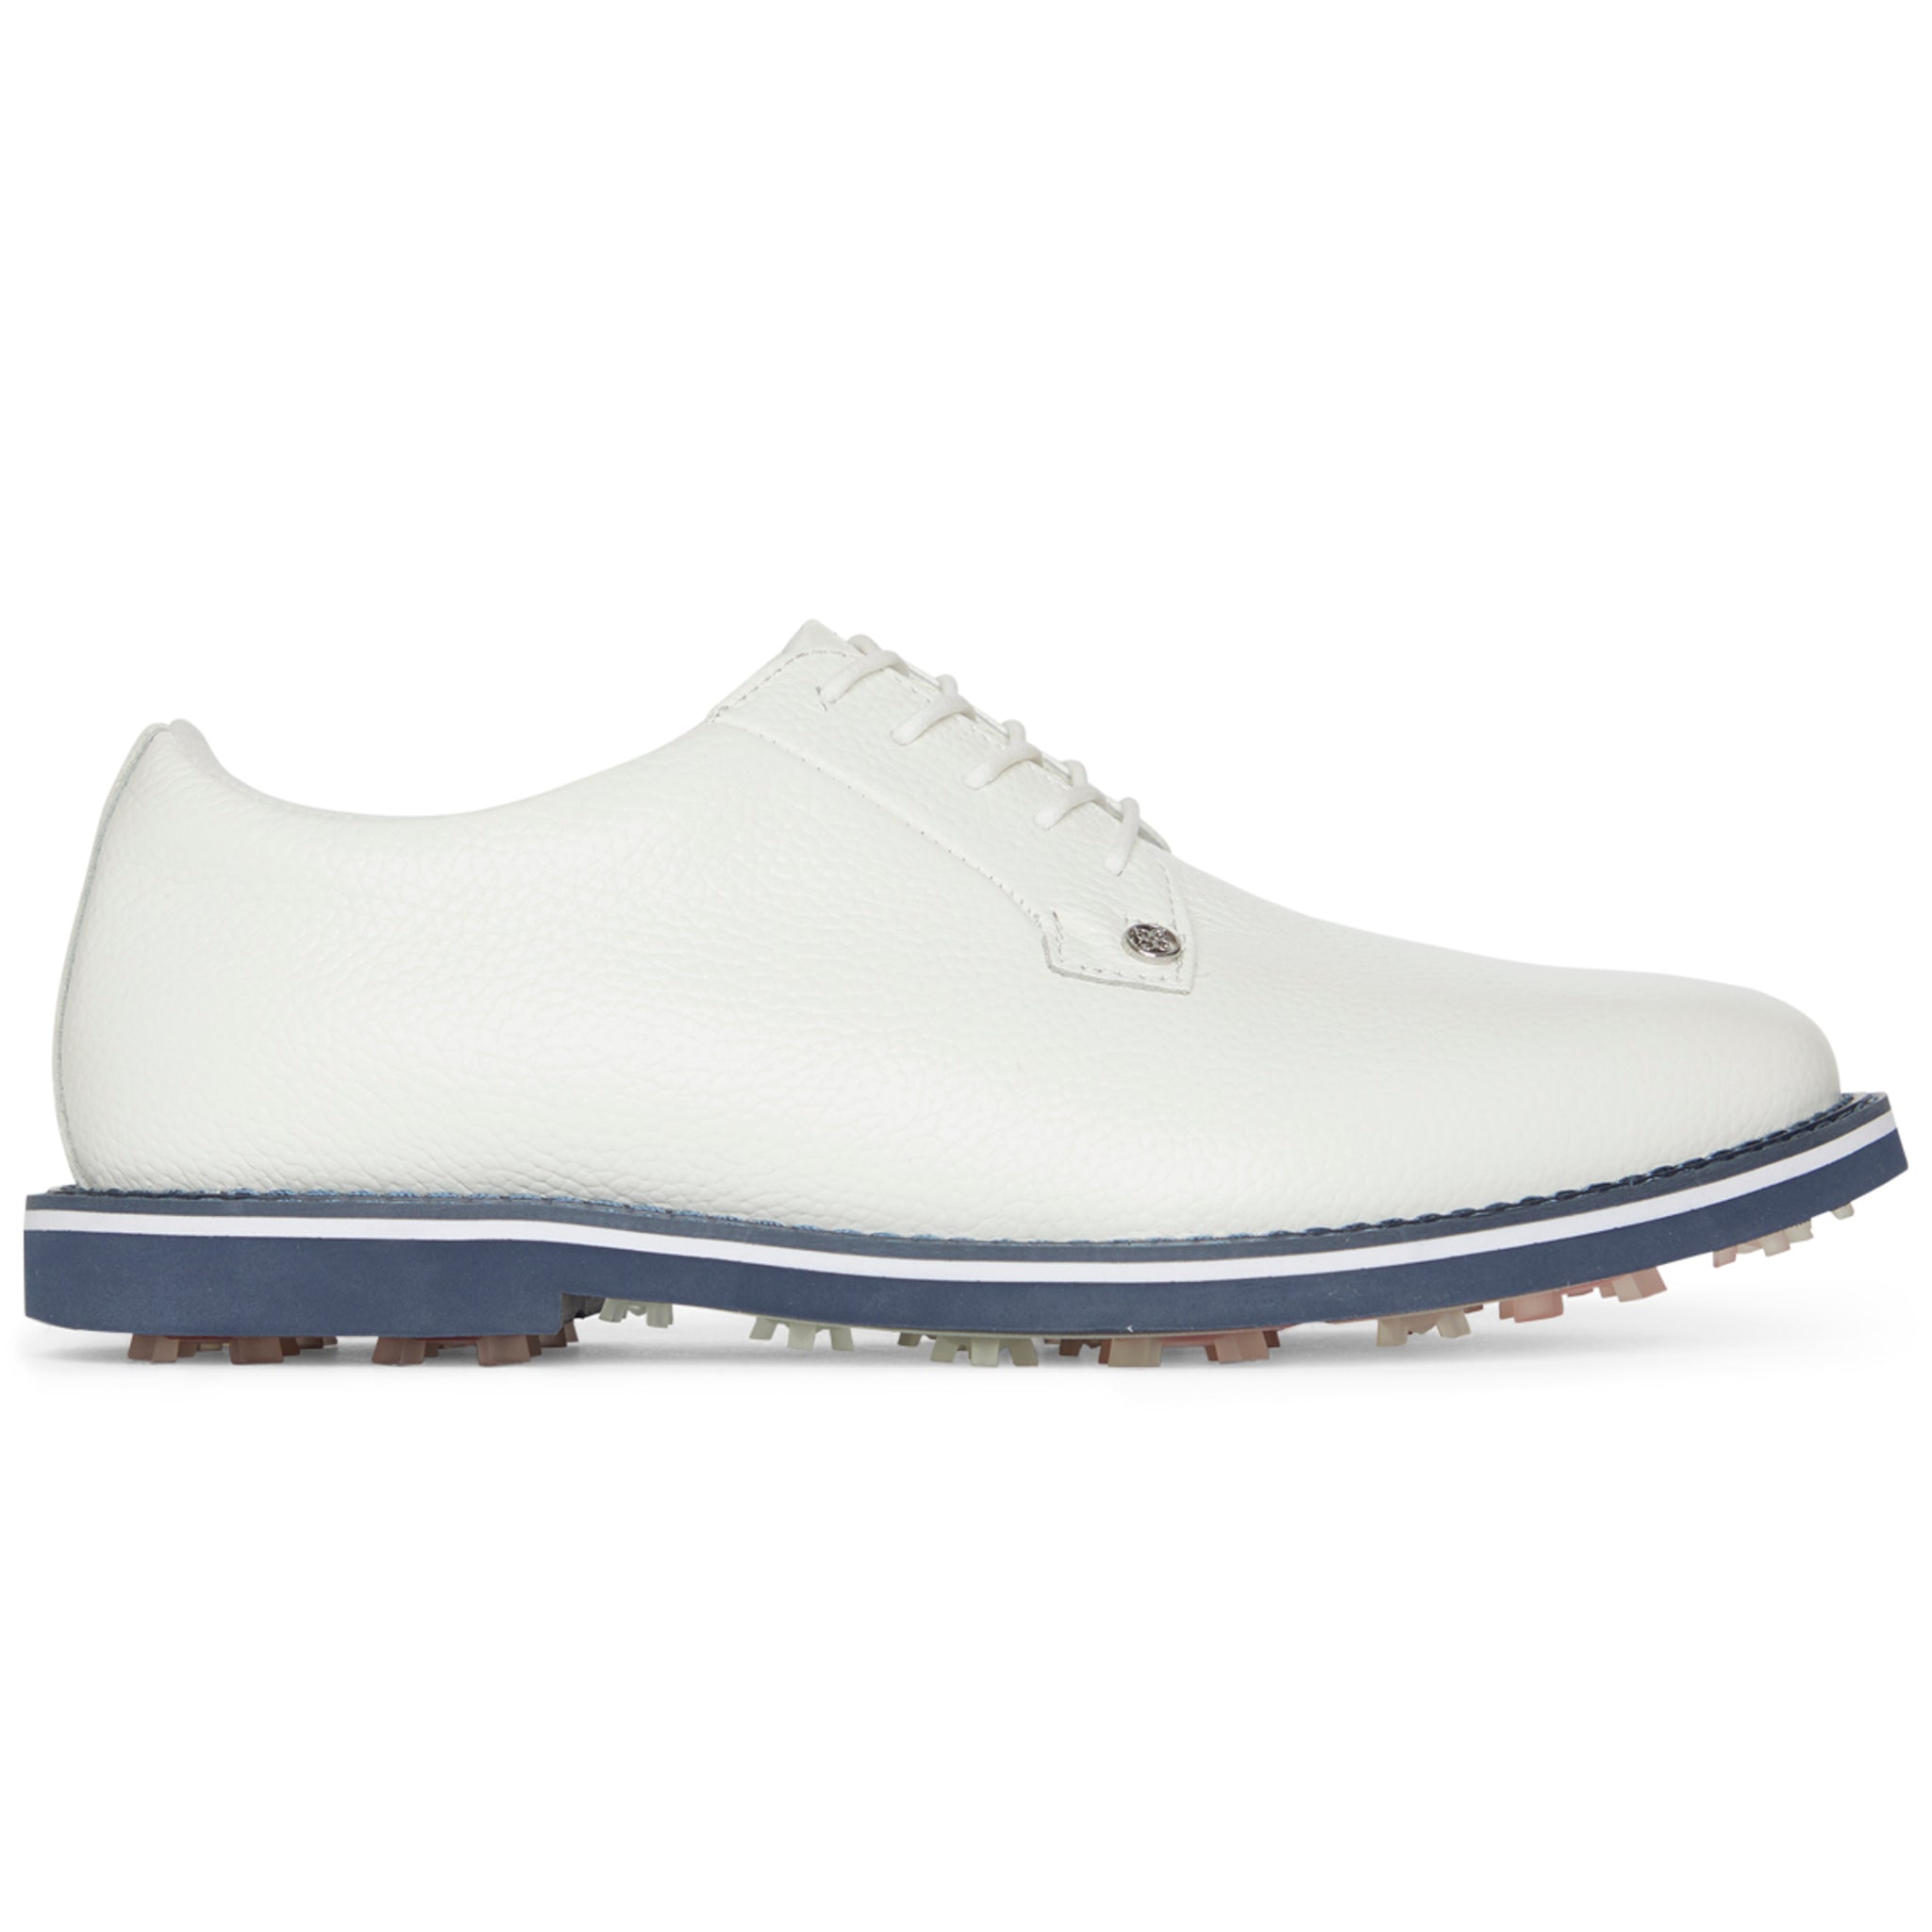 g-fore-gallivanter-pebble-leather-golf-shoes-gmf000001-snow-twilight